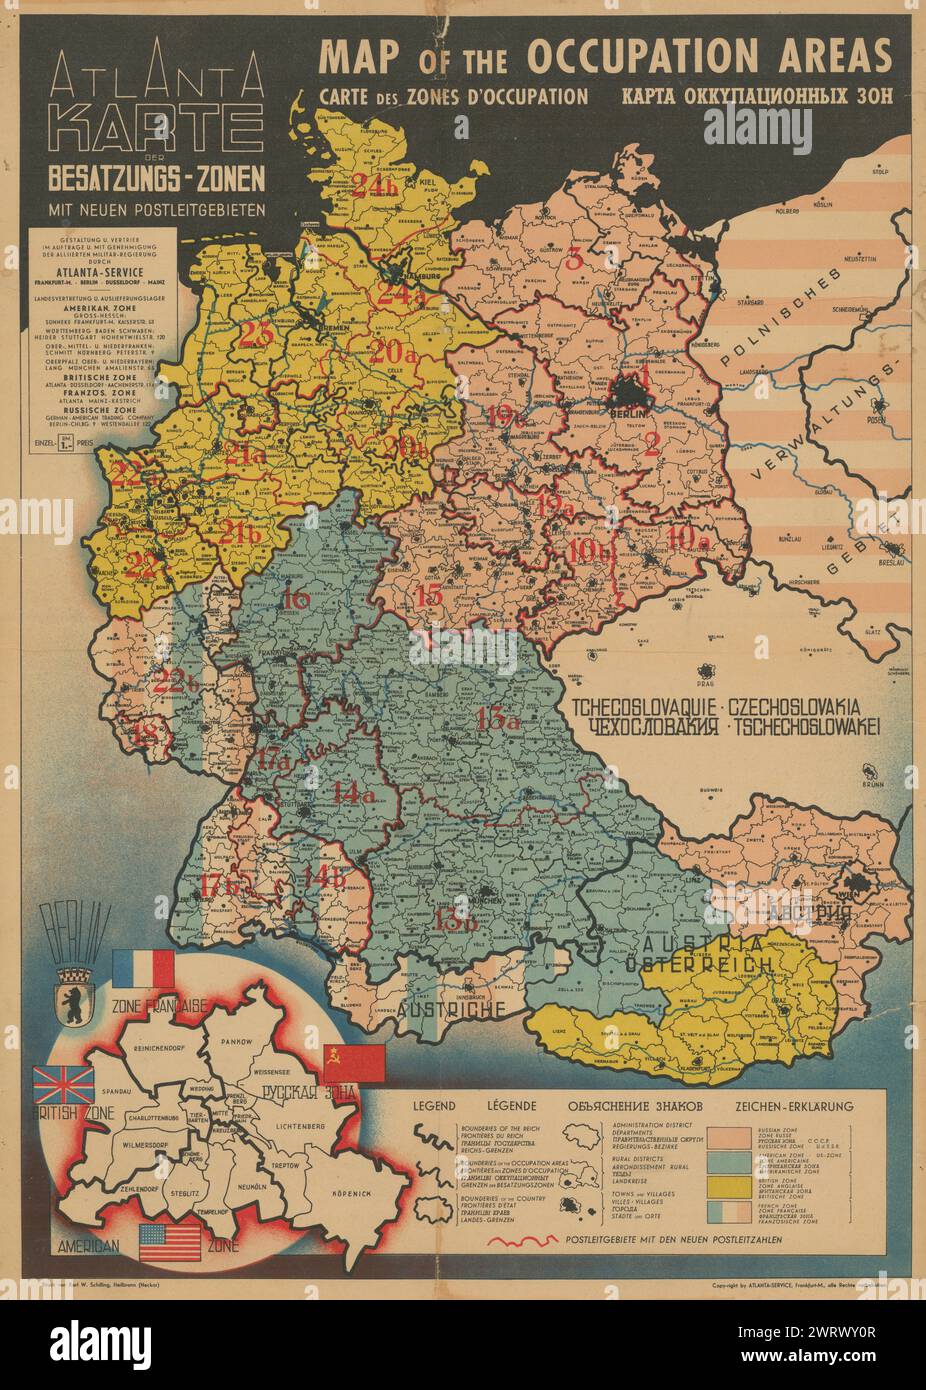 Atlanta Karte der Besatzungs-Zonen. Map of the Occupation Areas of Germany 1946 Stock Photo